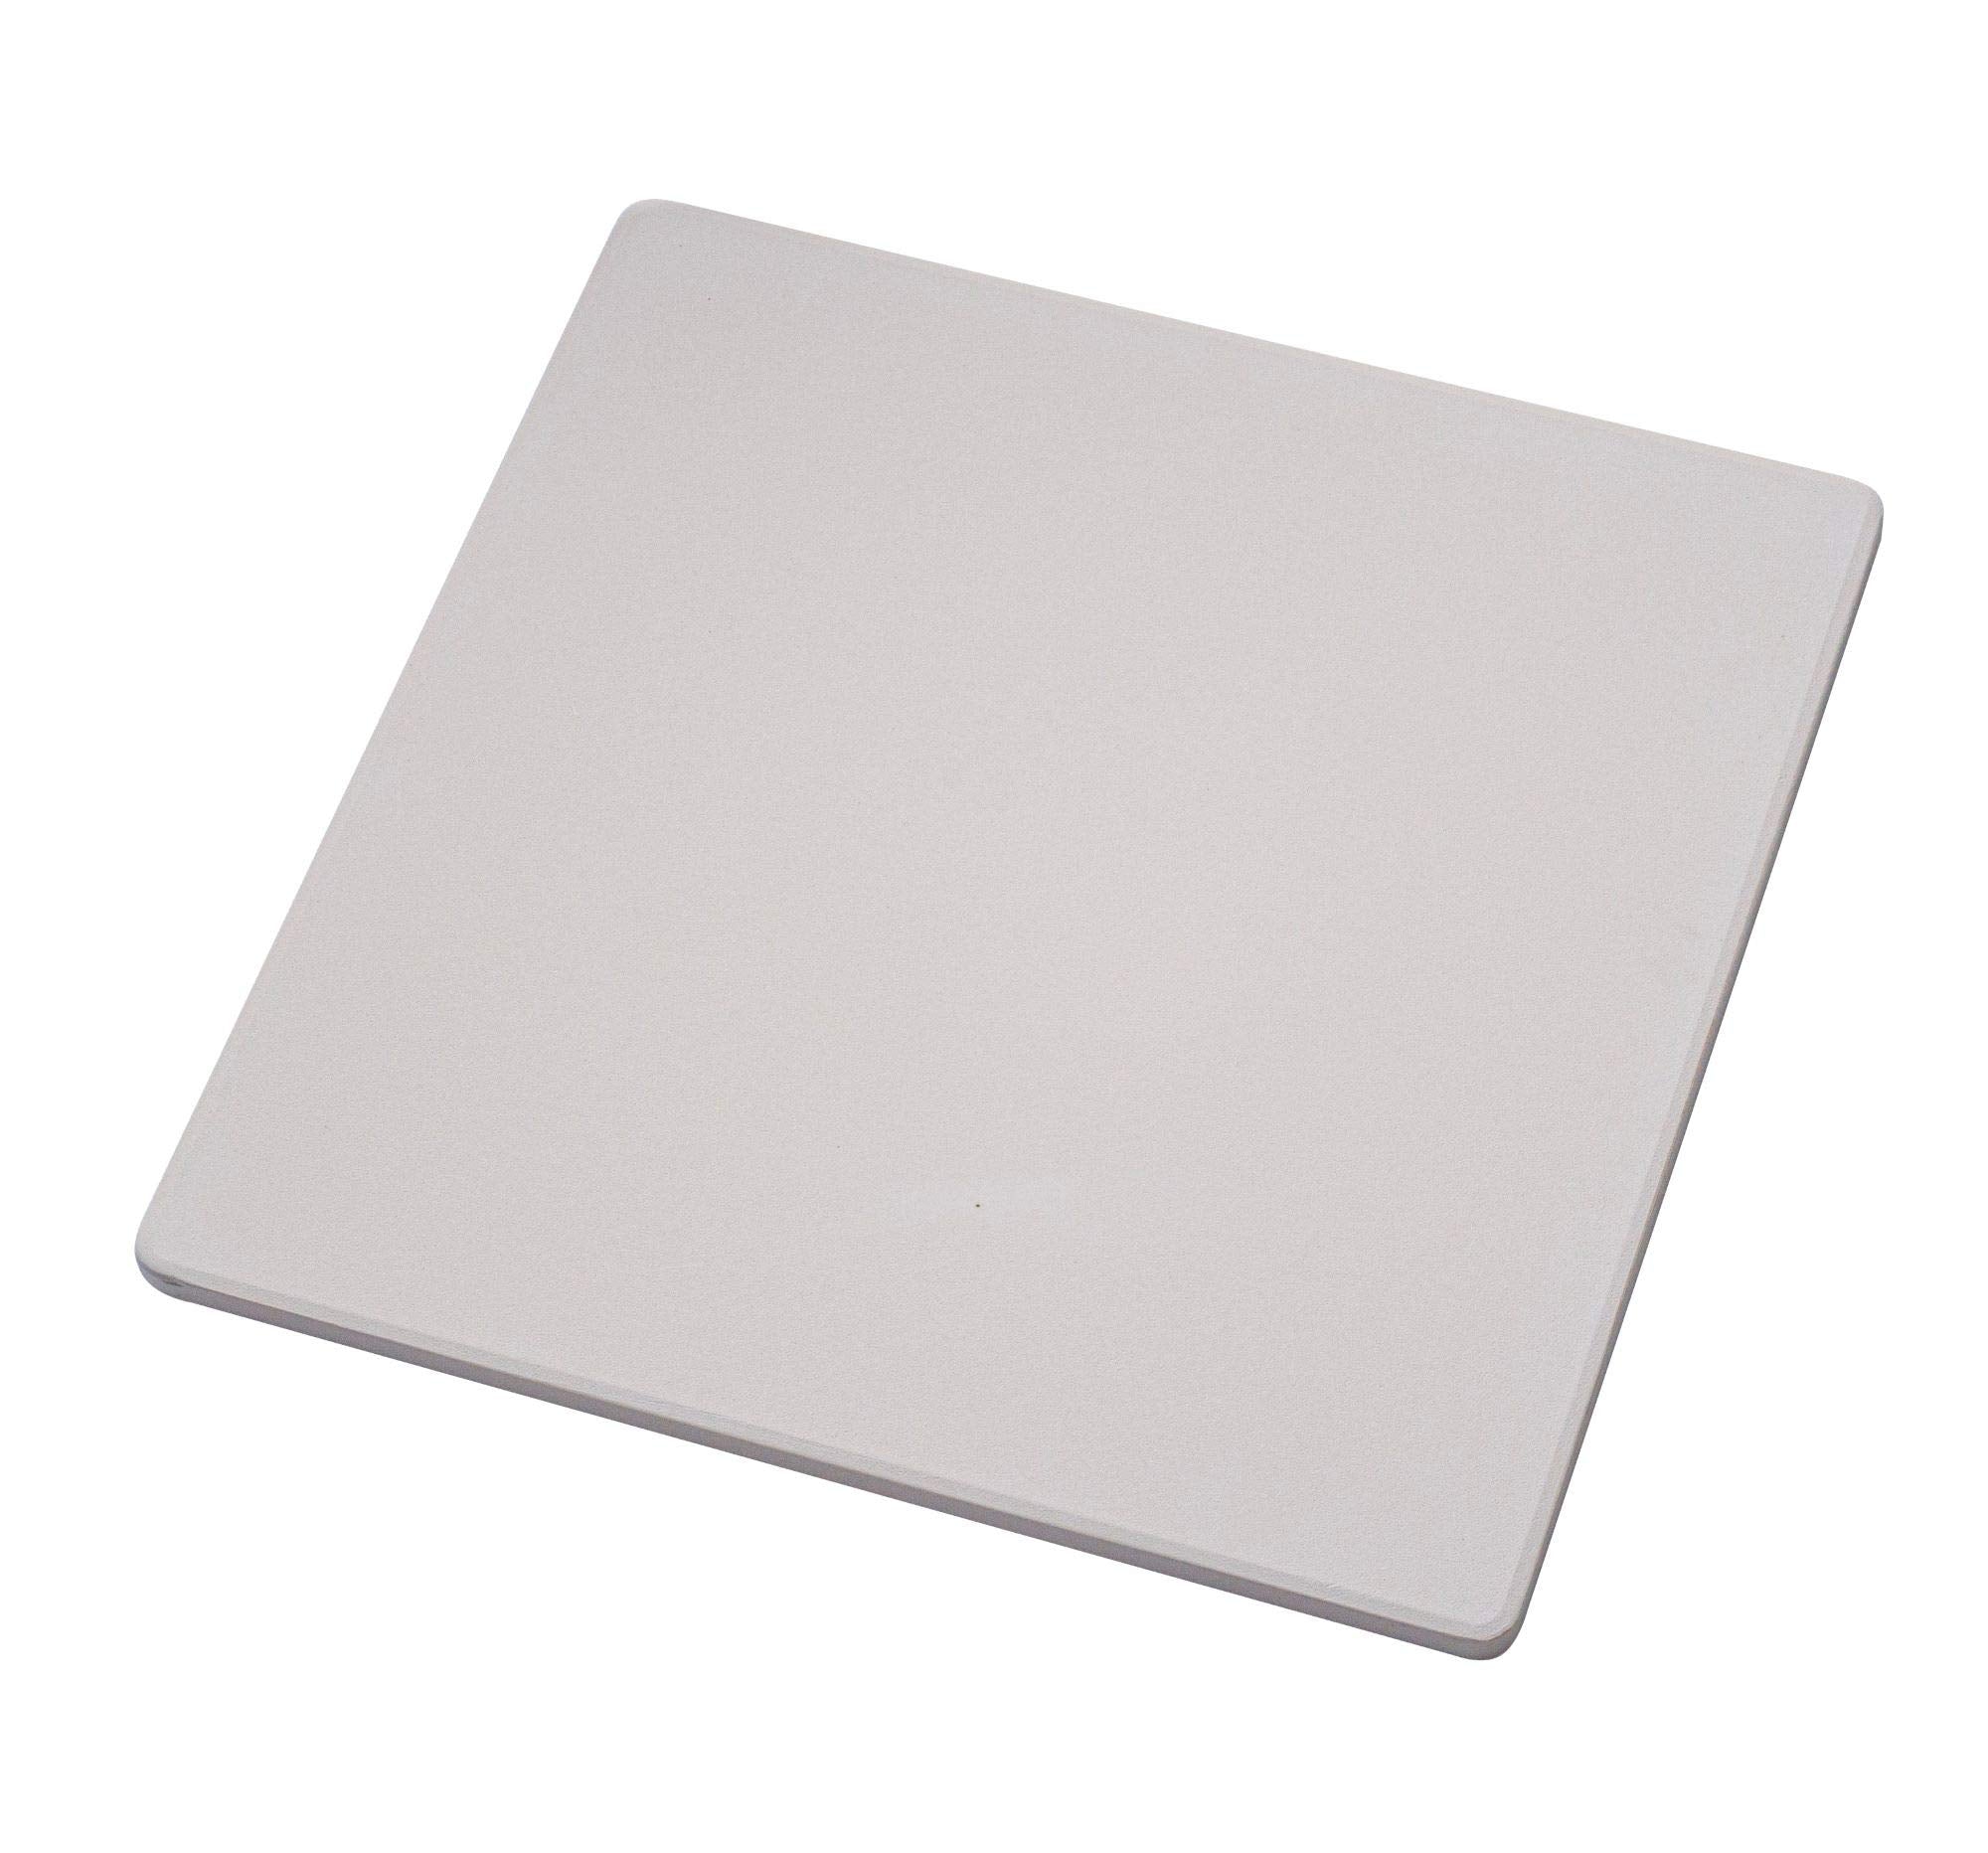 Premium 13" Square Pizza Stone for Grills and Ovens